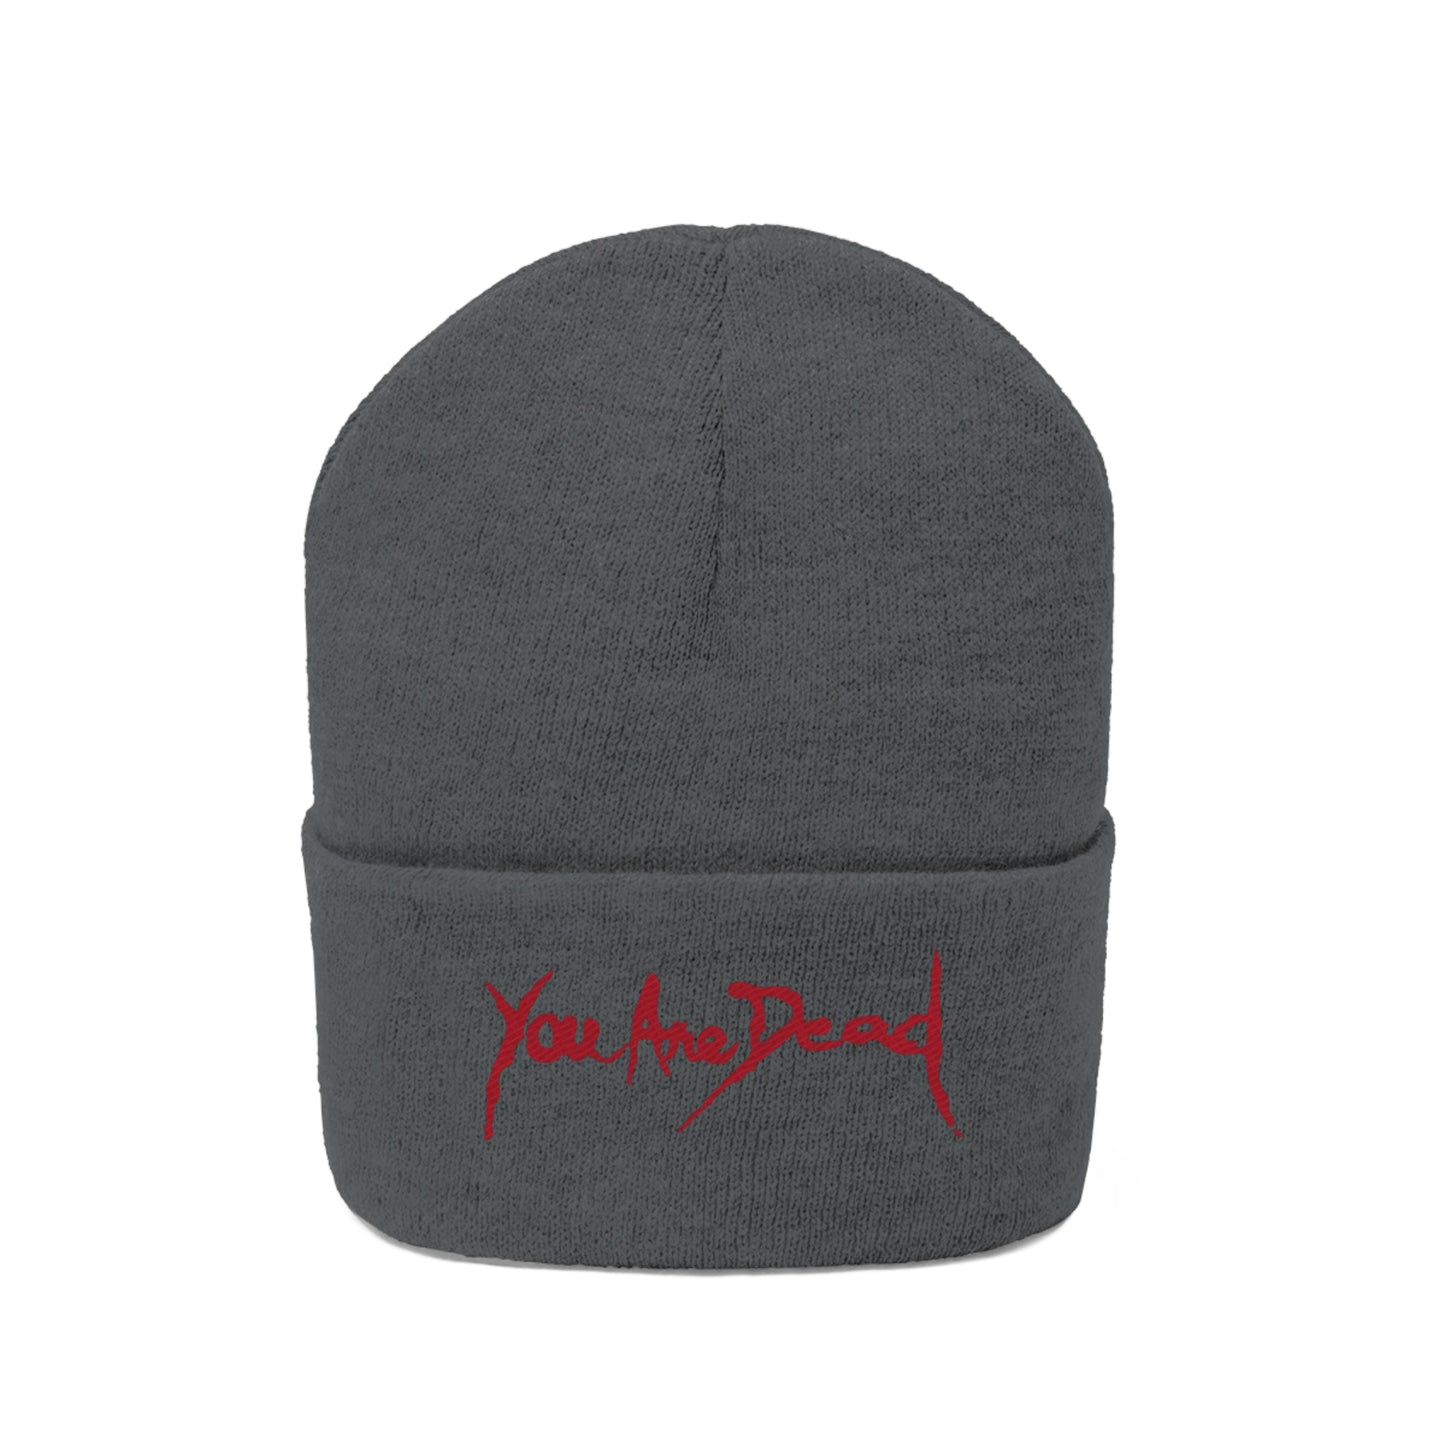 You are dead Resident Embroidered Beanie Embroiderry